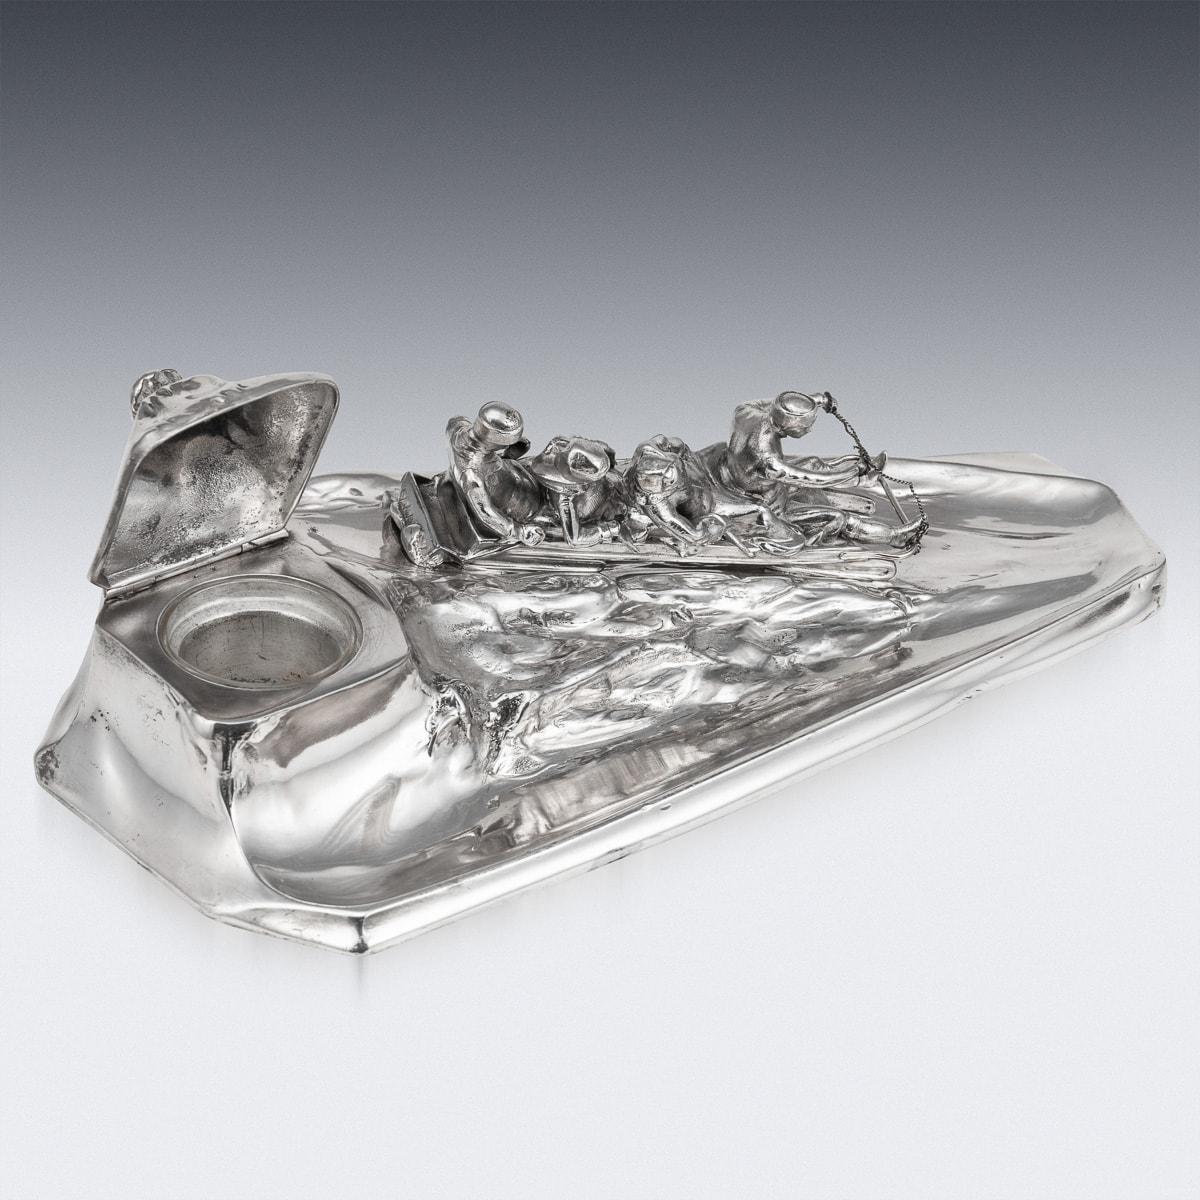 Antique 20th Century German Silver Plated Toboggan Shaped Inkwell, Kayser c.1920 For Sale 1